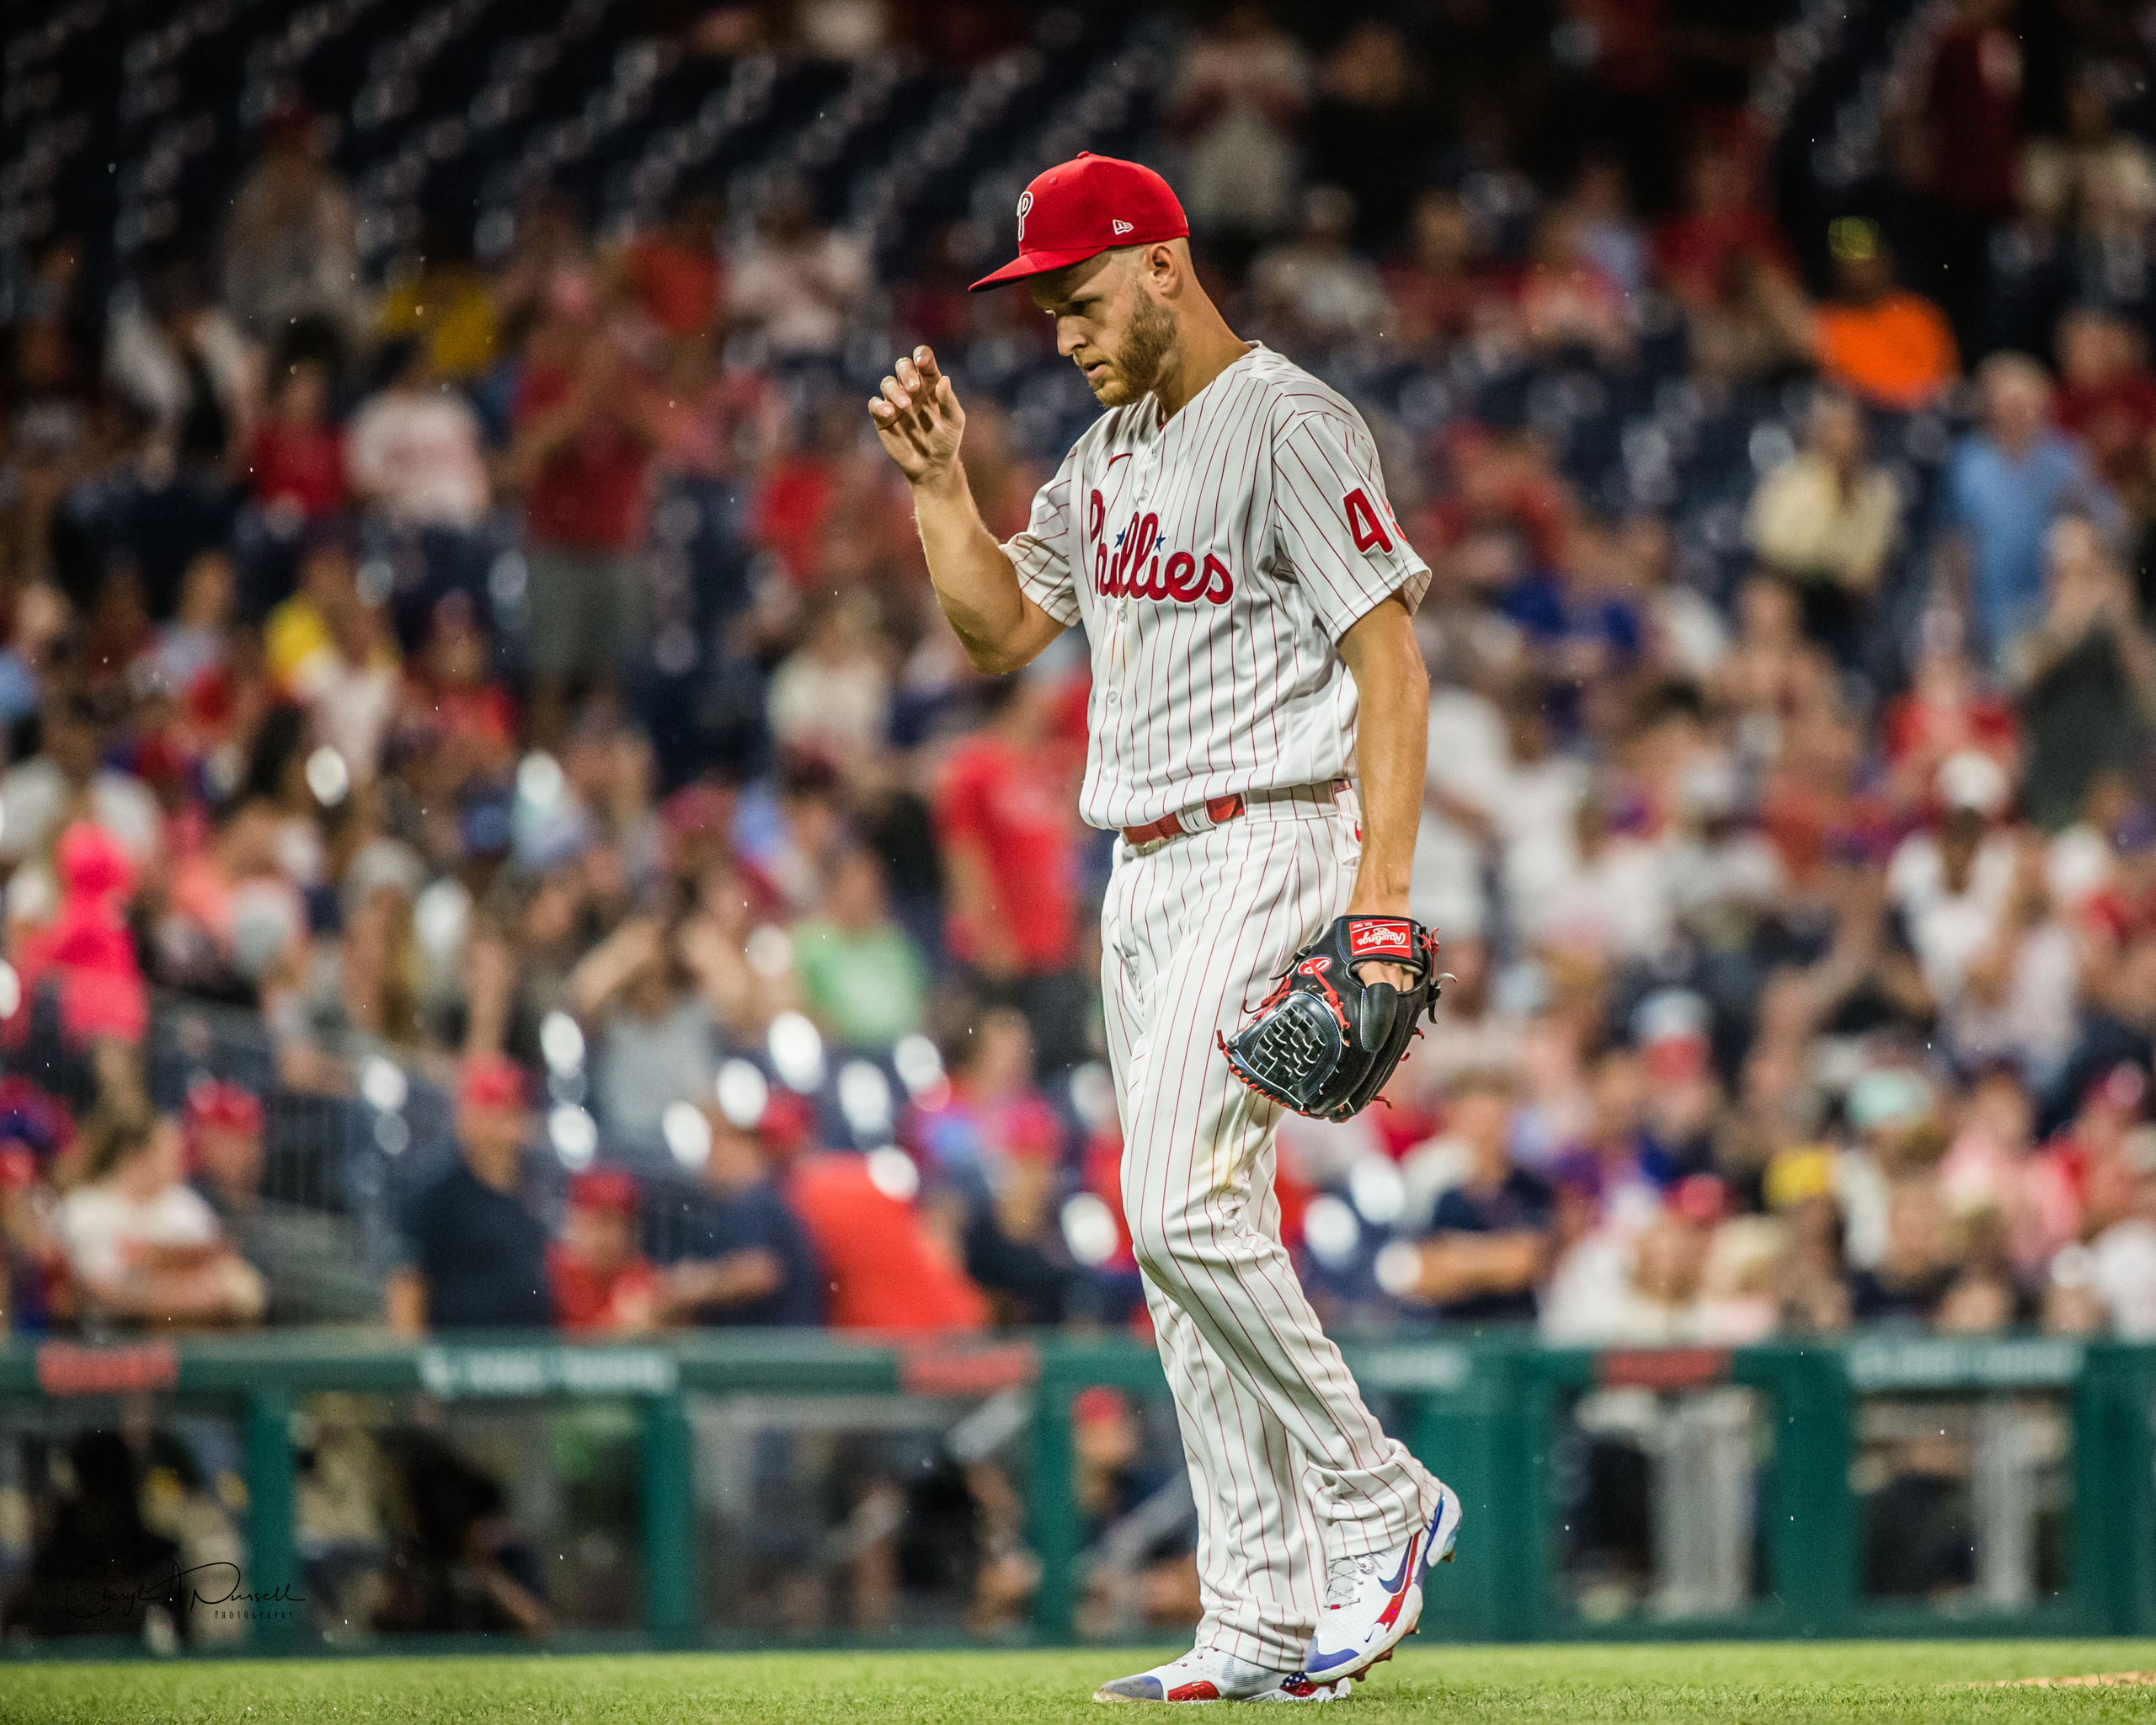 Wheeler, Clemens lead Phillies past Tigers for 5th straight win